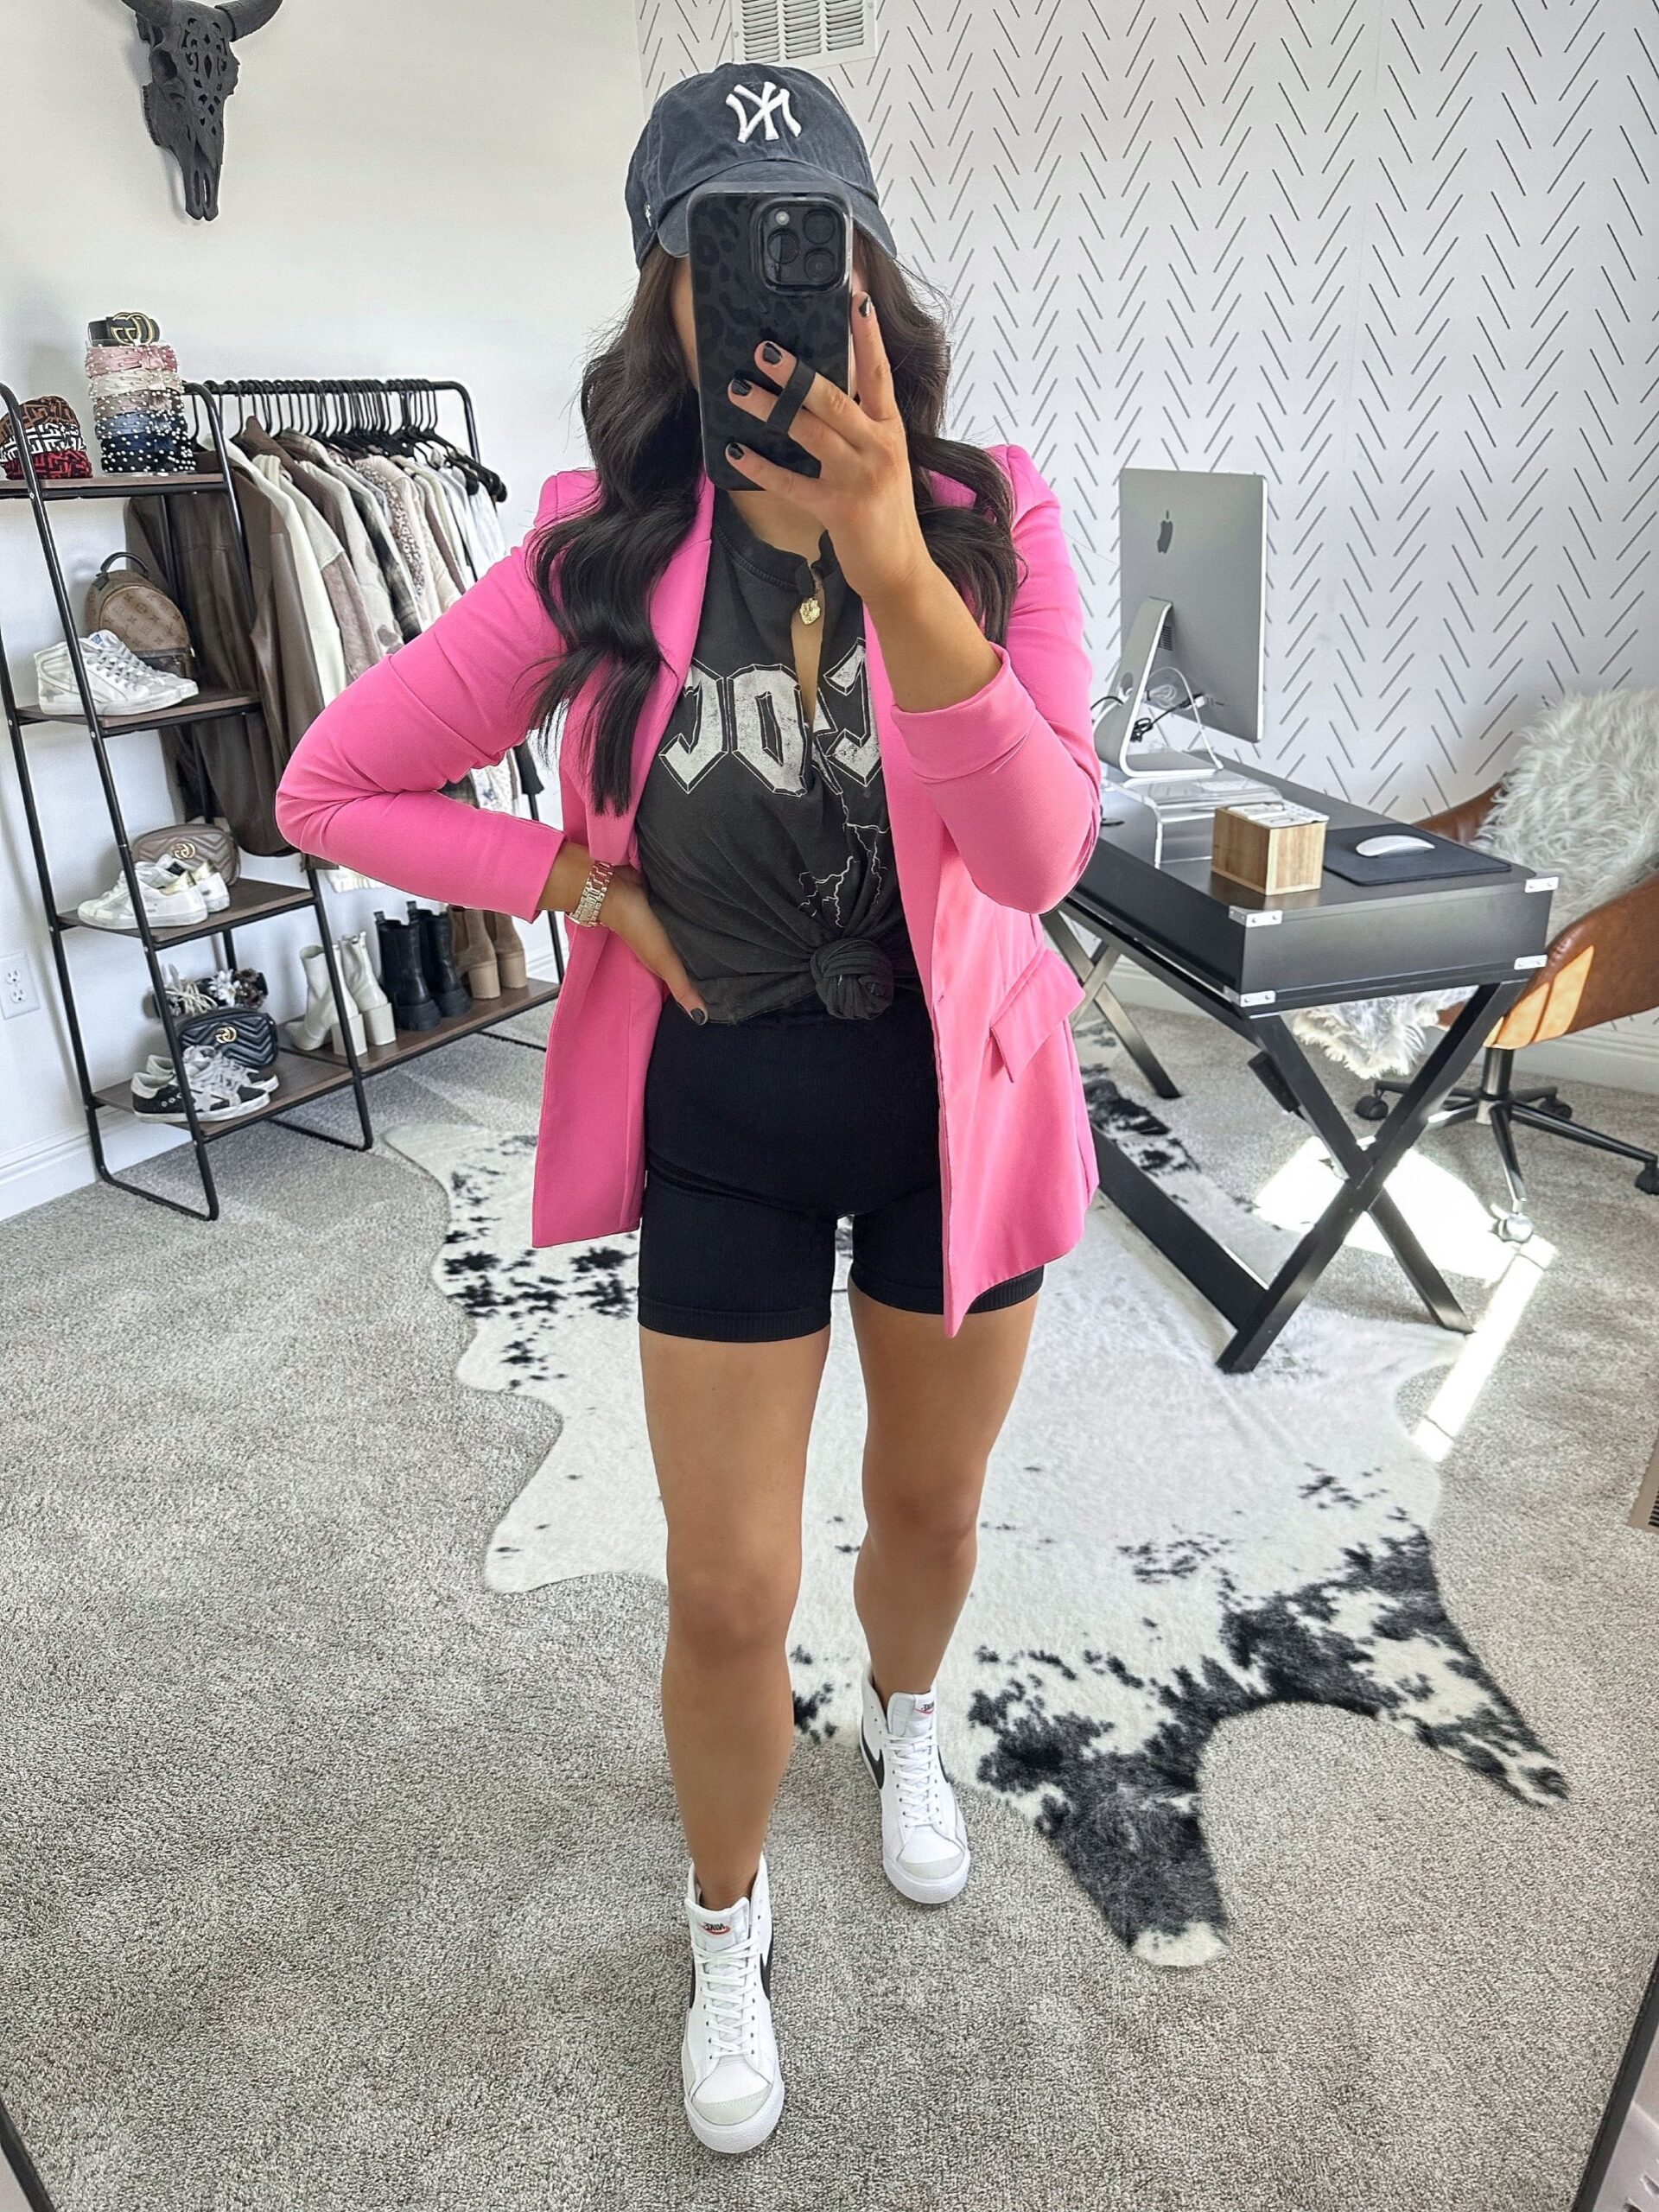 Hot Pink Blazer Outfit Ideas